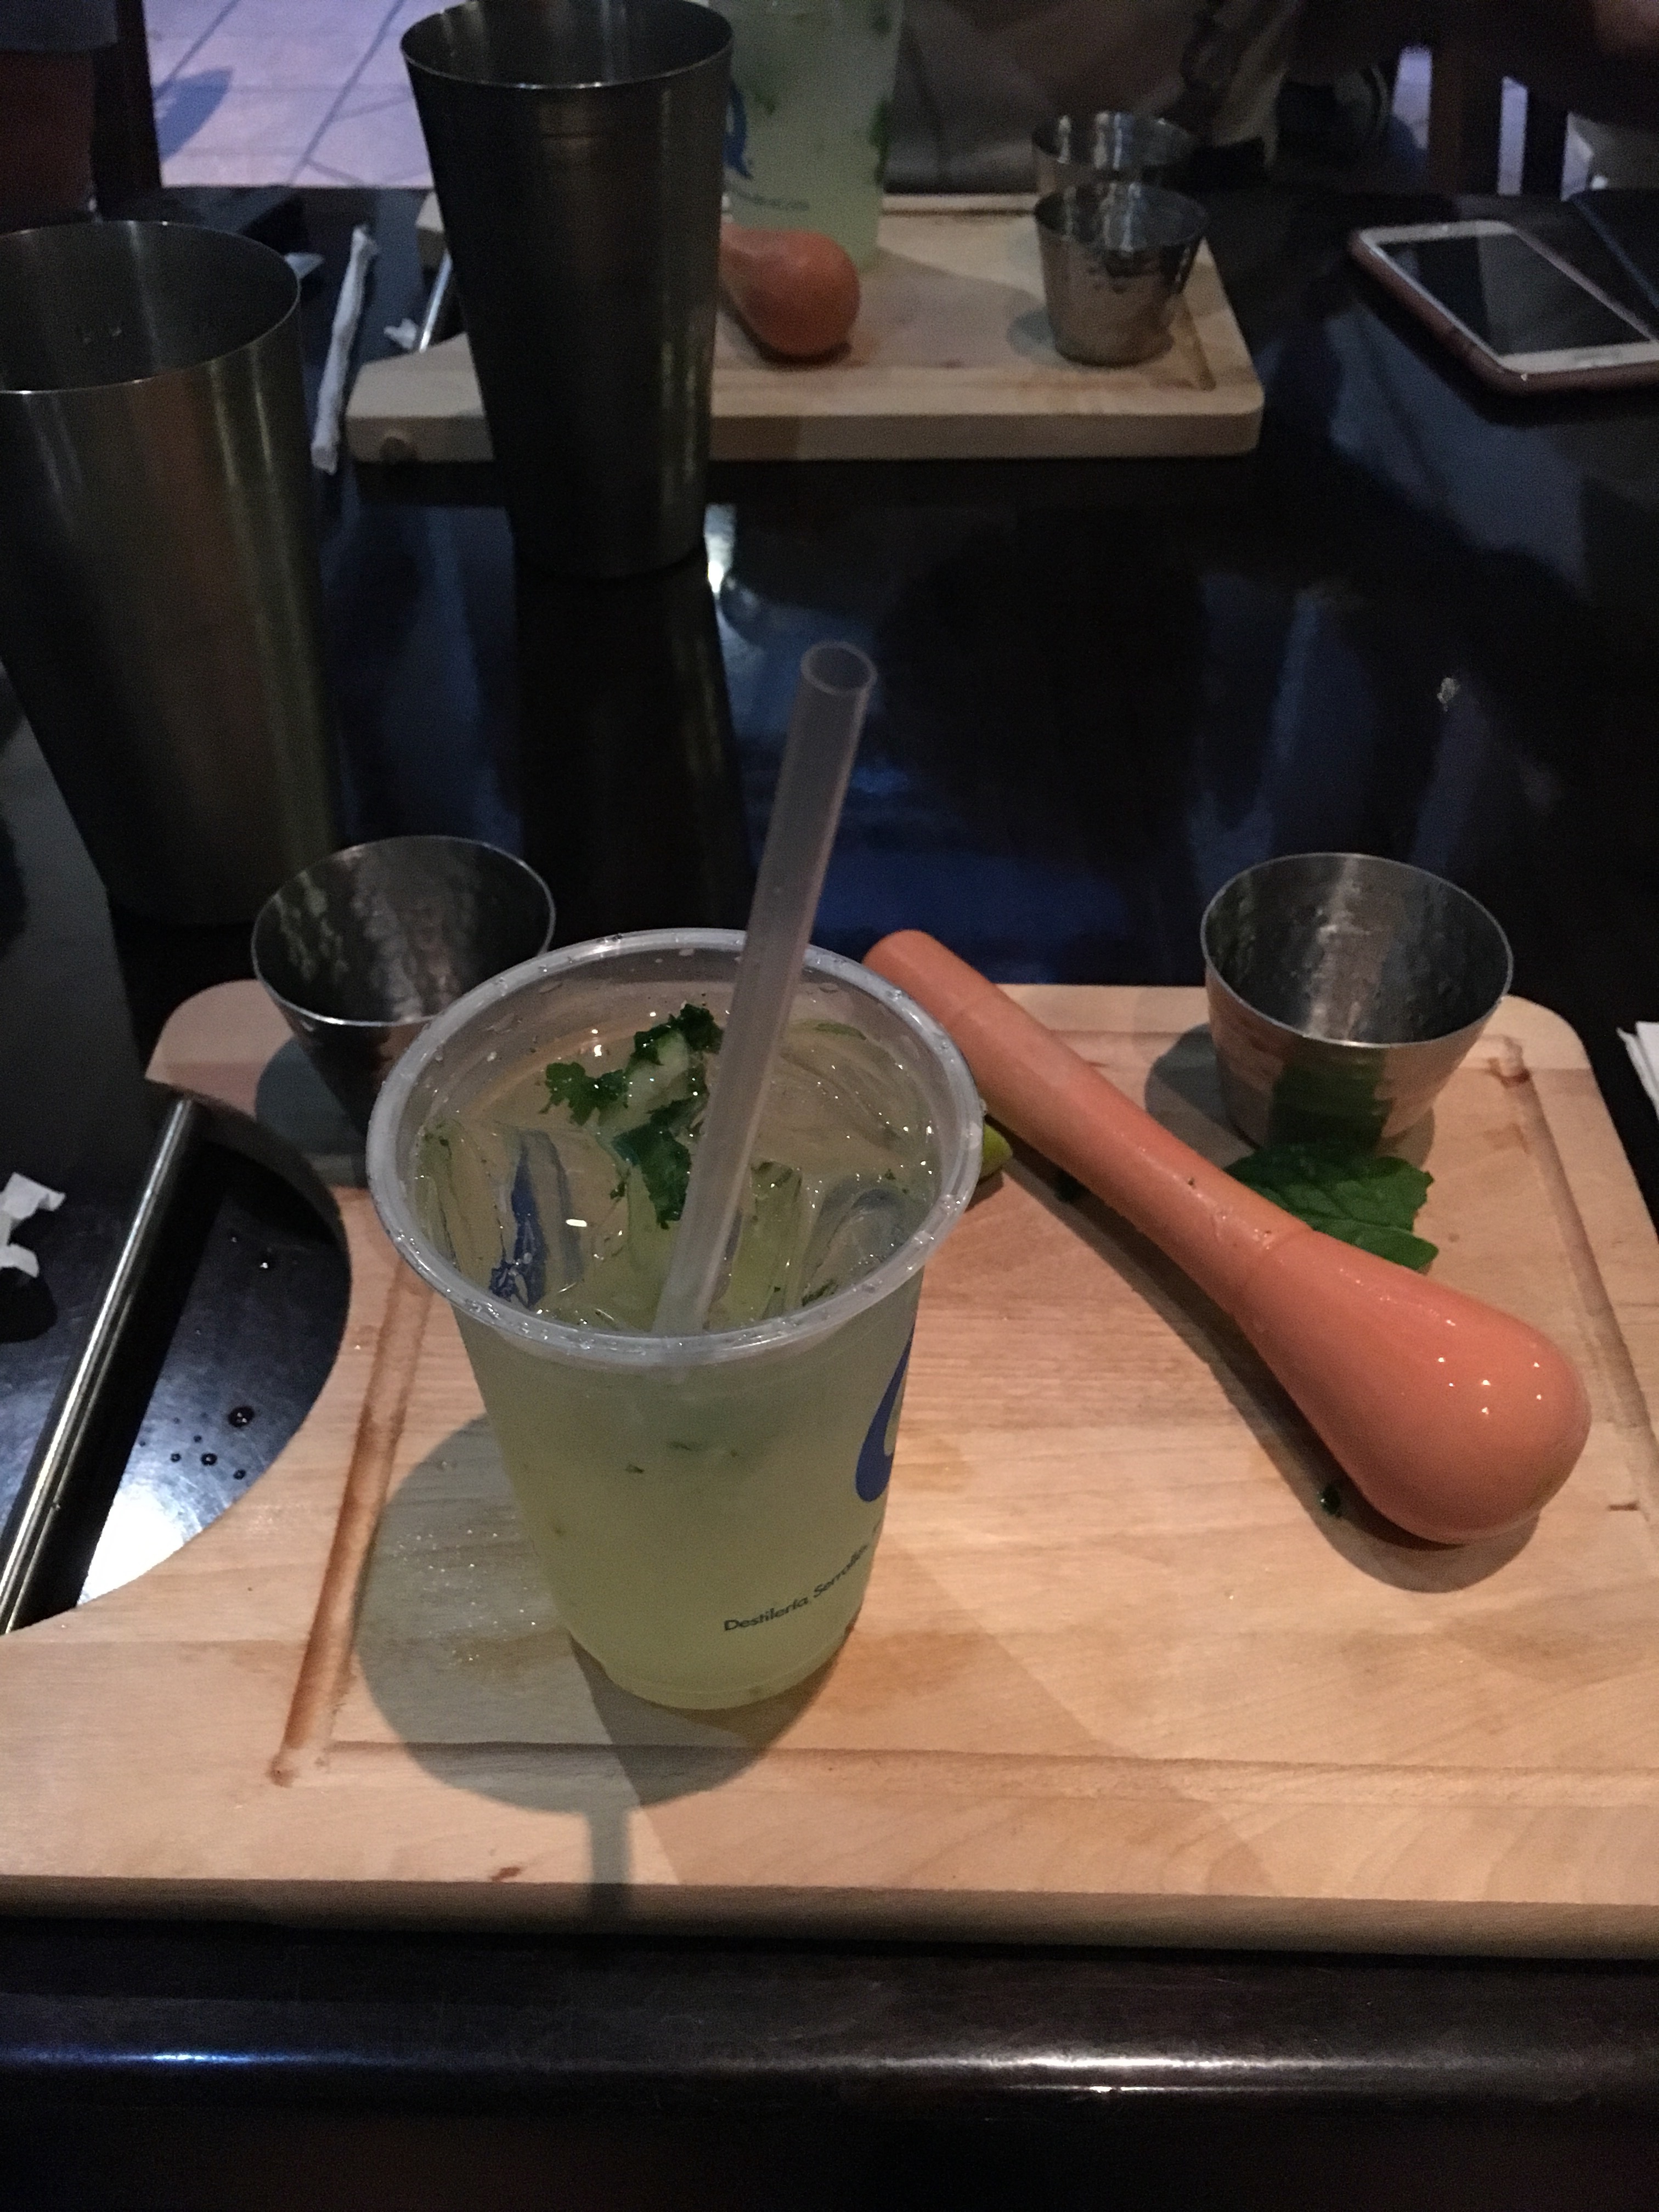 A green alcoholic drink, freshly made on a chopping board with pestle beside in it, in post titled #SoSS sharing